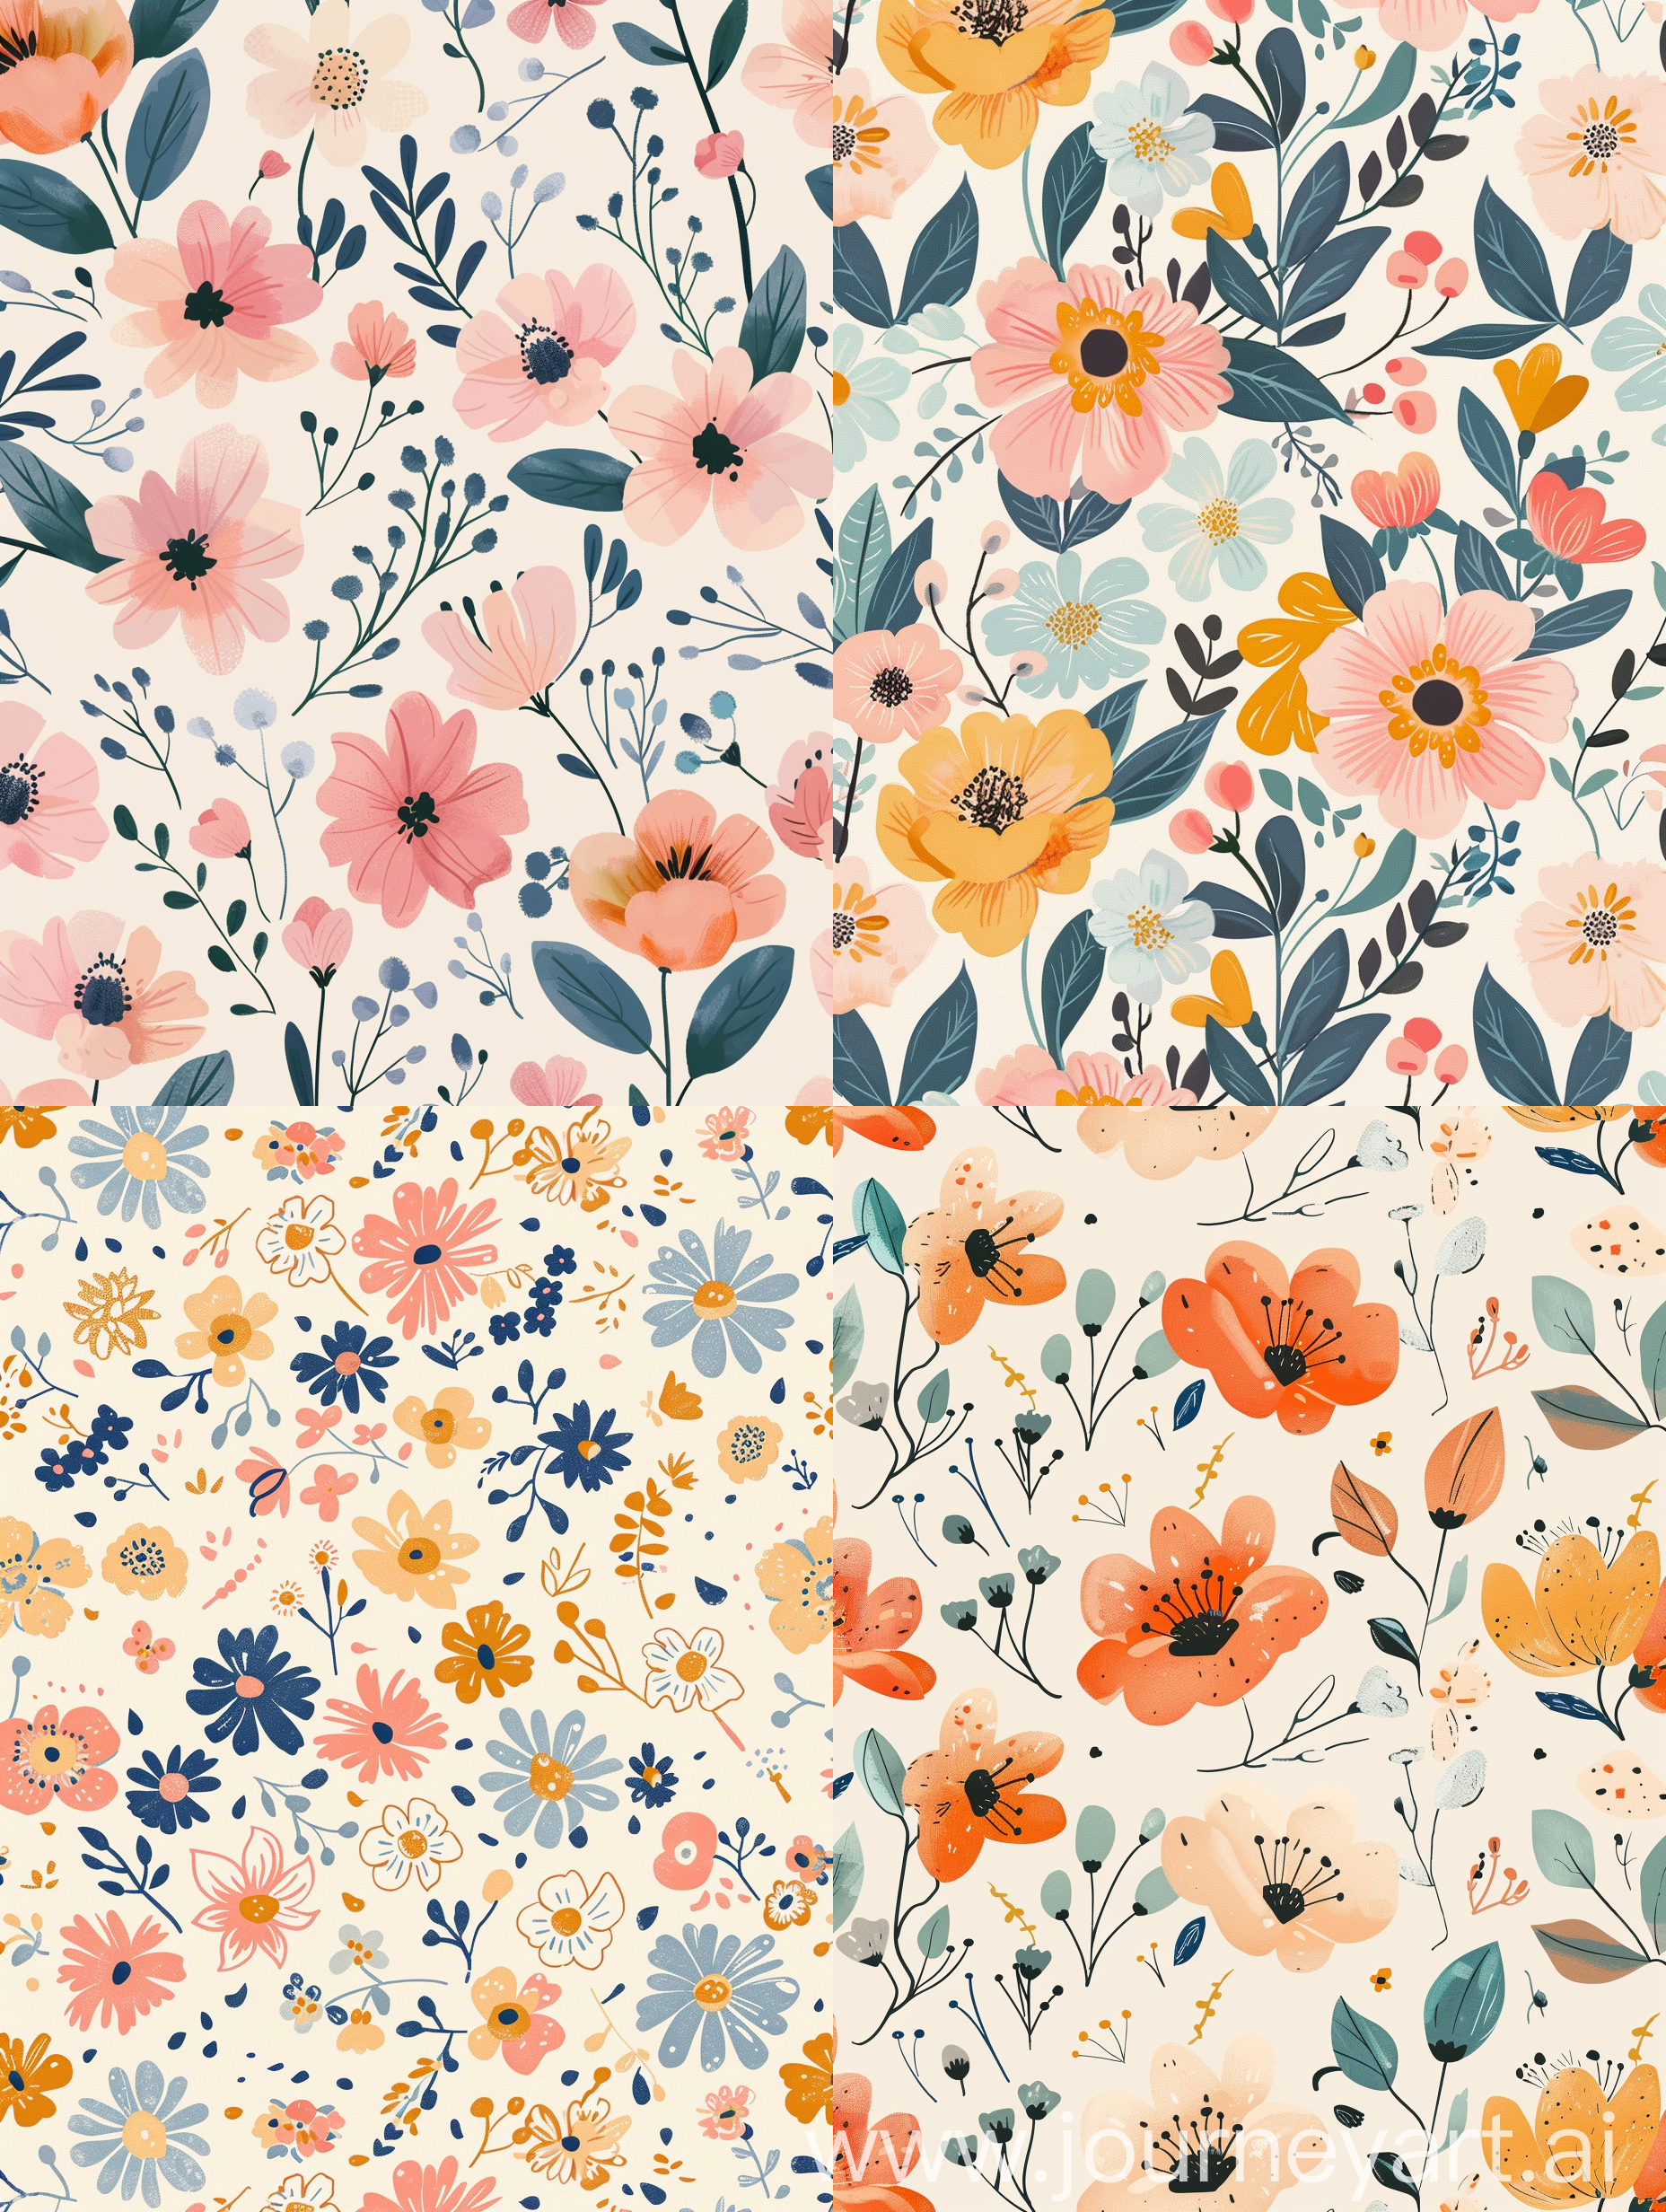 soft, floral seamless pattern for kids